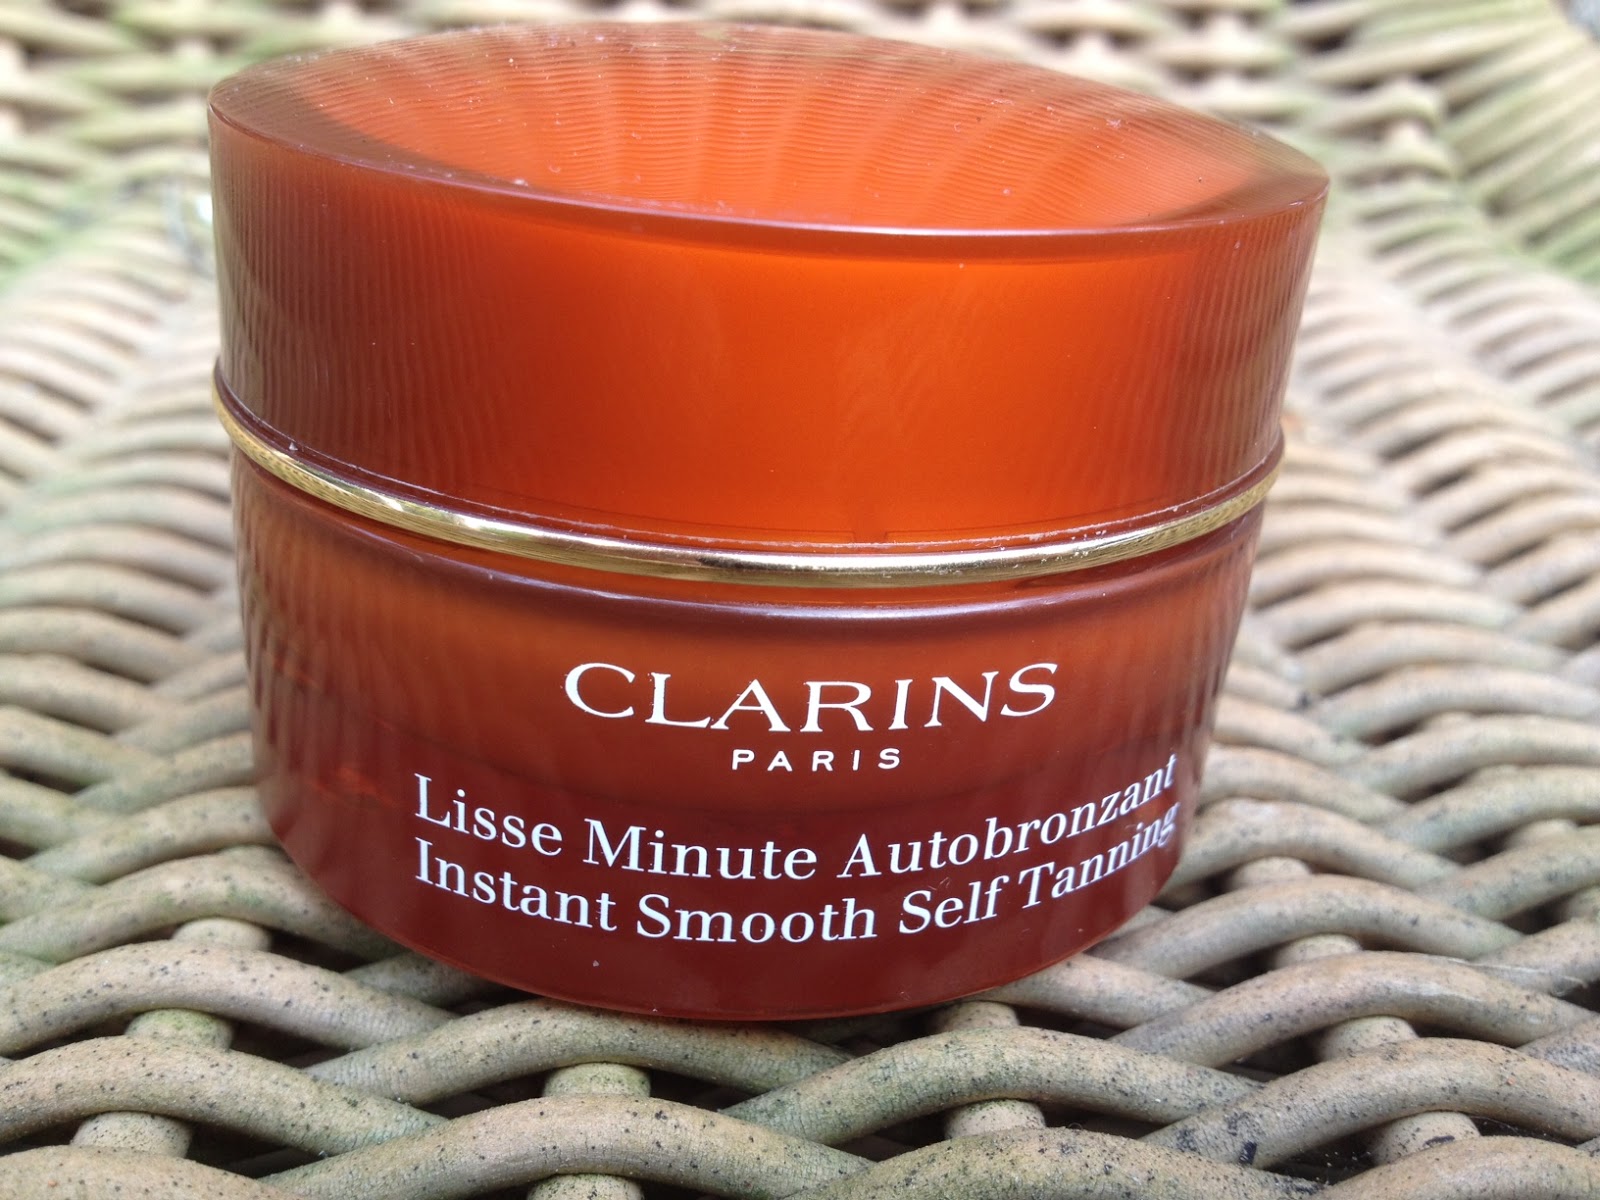 Clarins Instant Smooth Self Tanning - wide 10